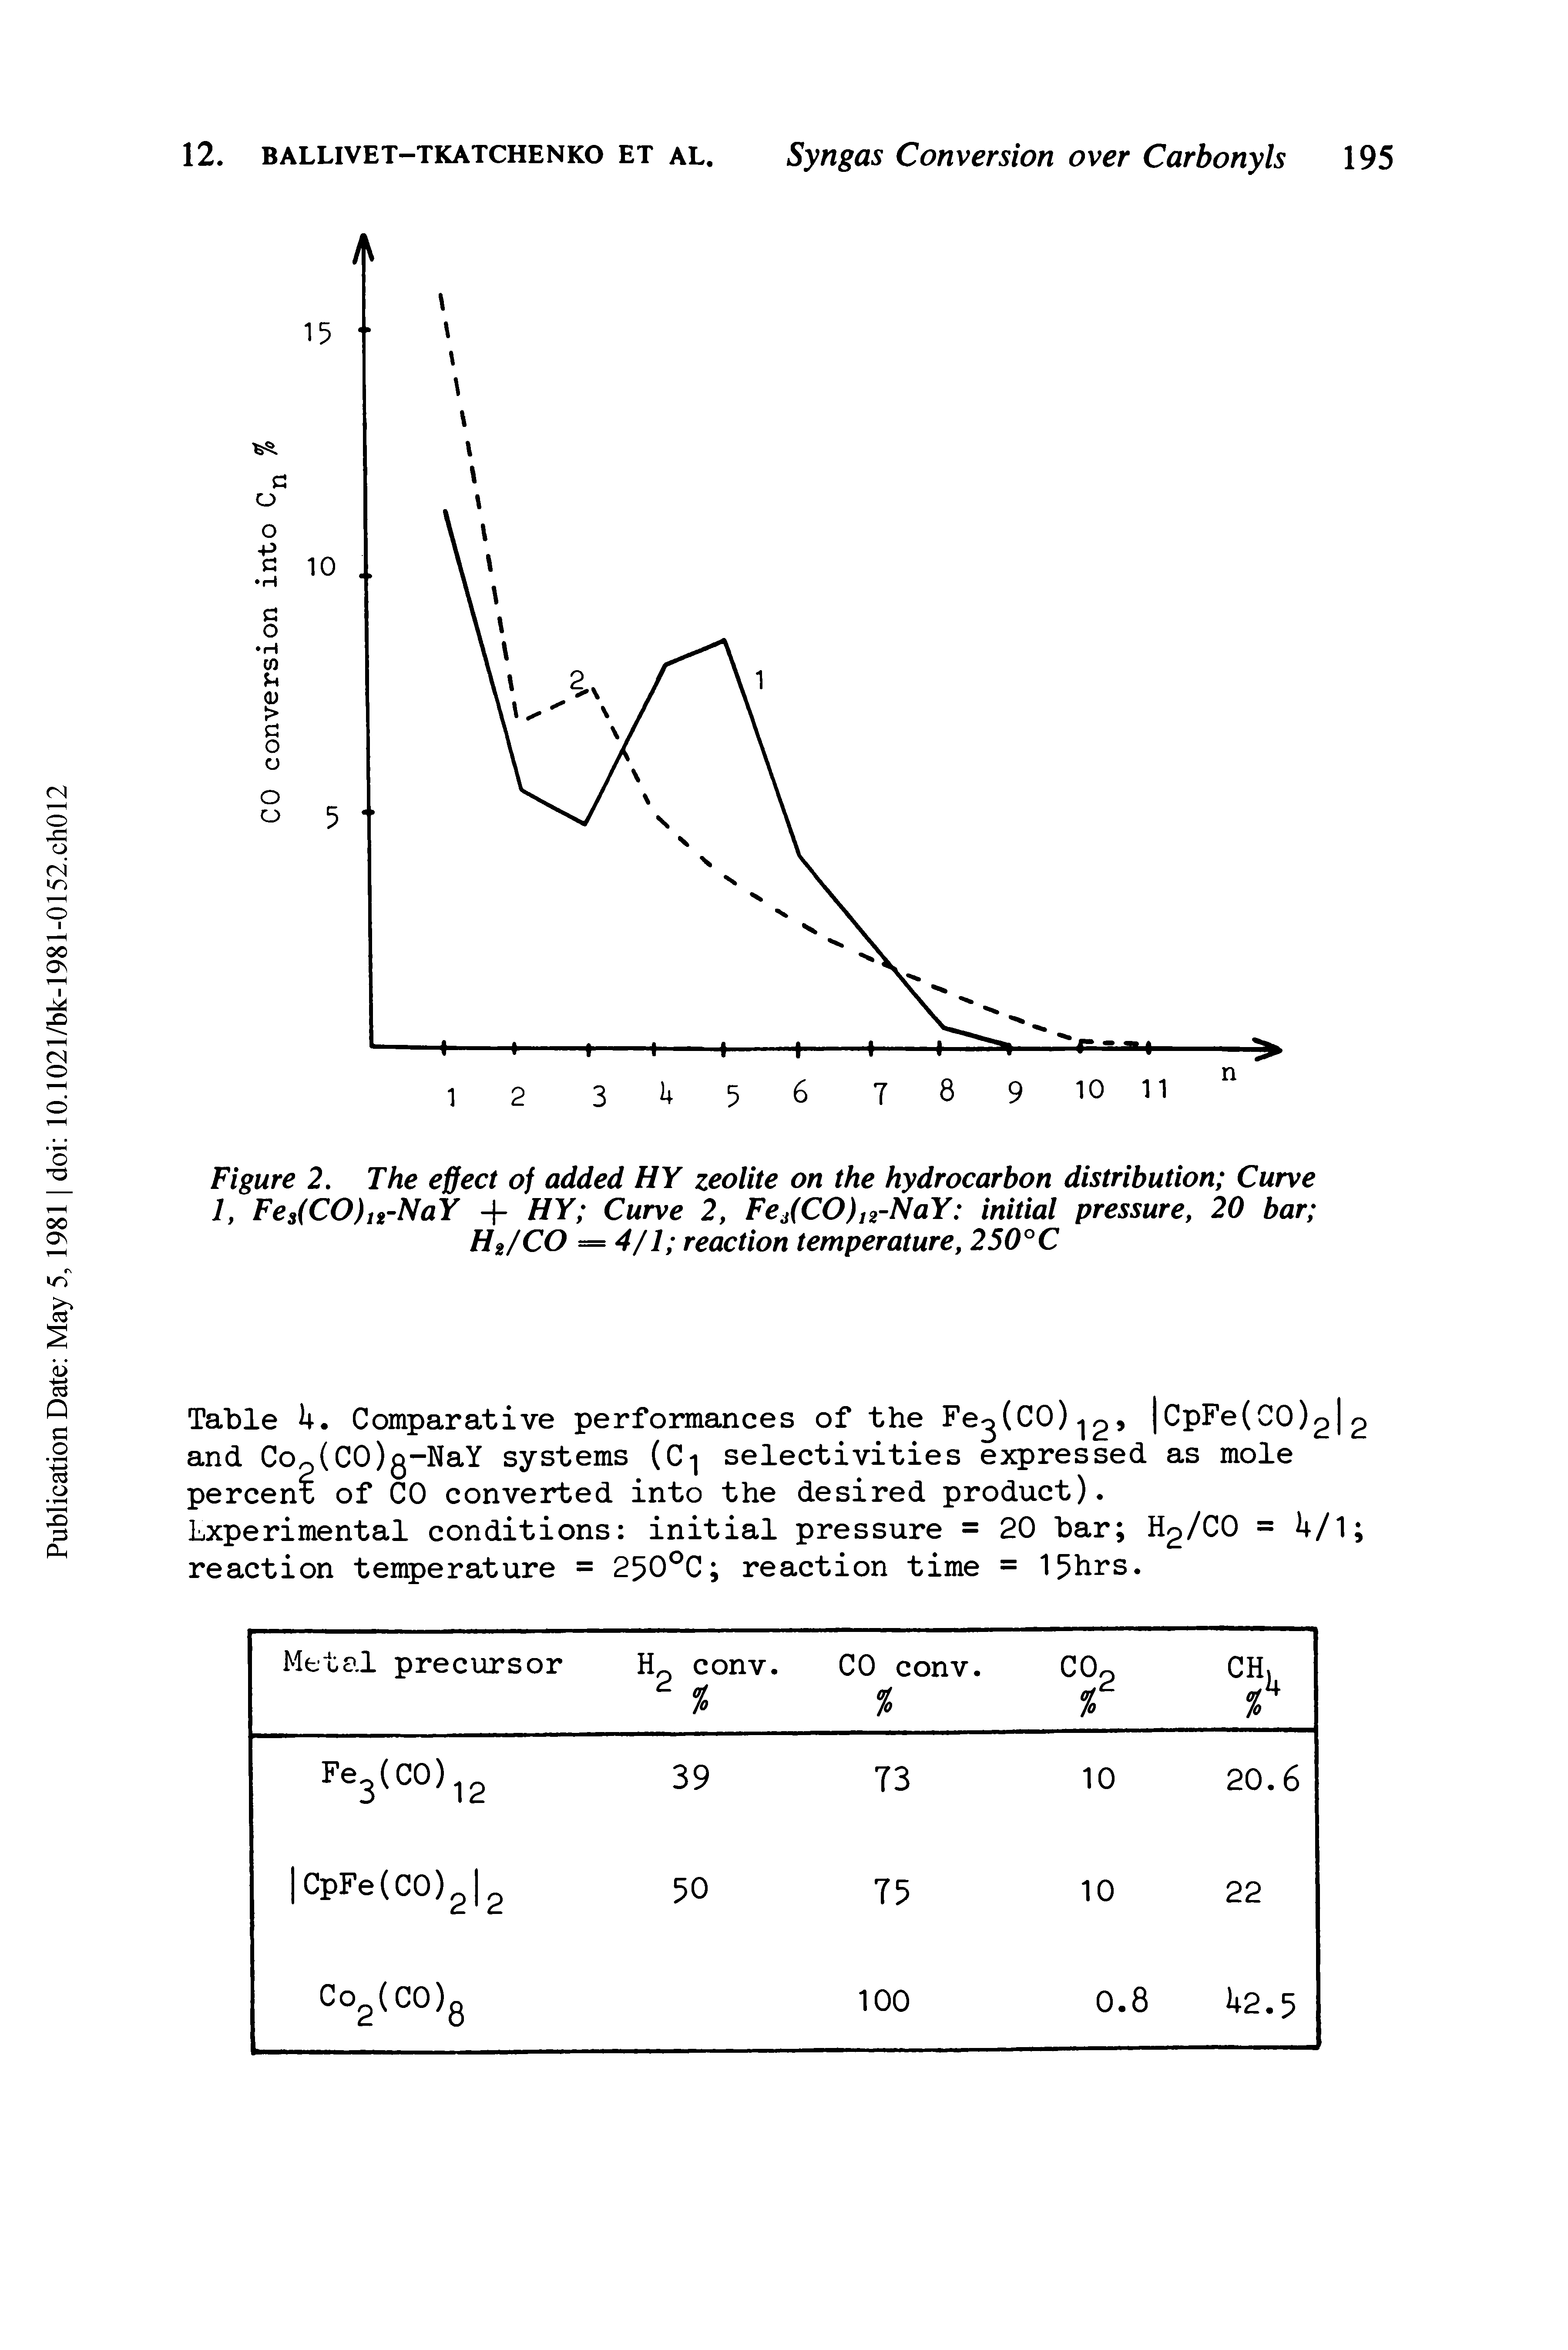 Figure 2. The effect of added HY zeolite on the hydrocarbon distribution Curve 1, Fes(CO)Ii-NaY + HY Curve 2, FeJCO)12-NaY initial pressure, 20 bar Hi/CO = 4/1 reaction temperature, 250°C...